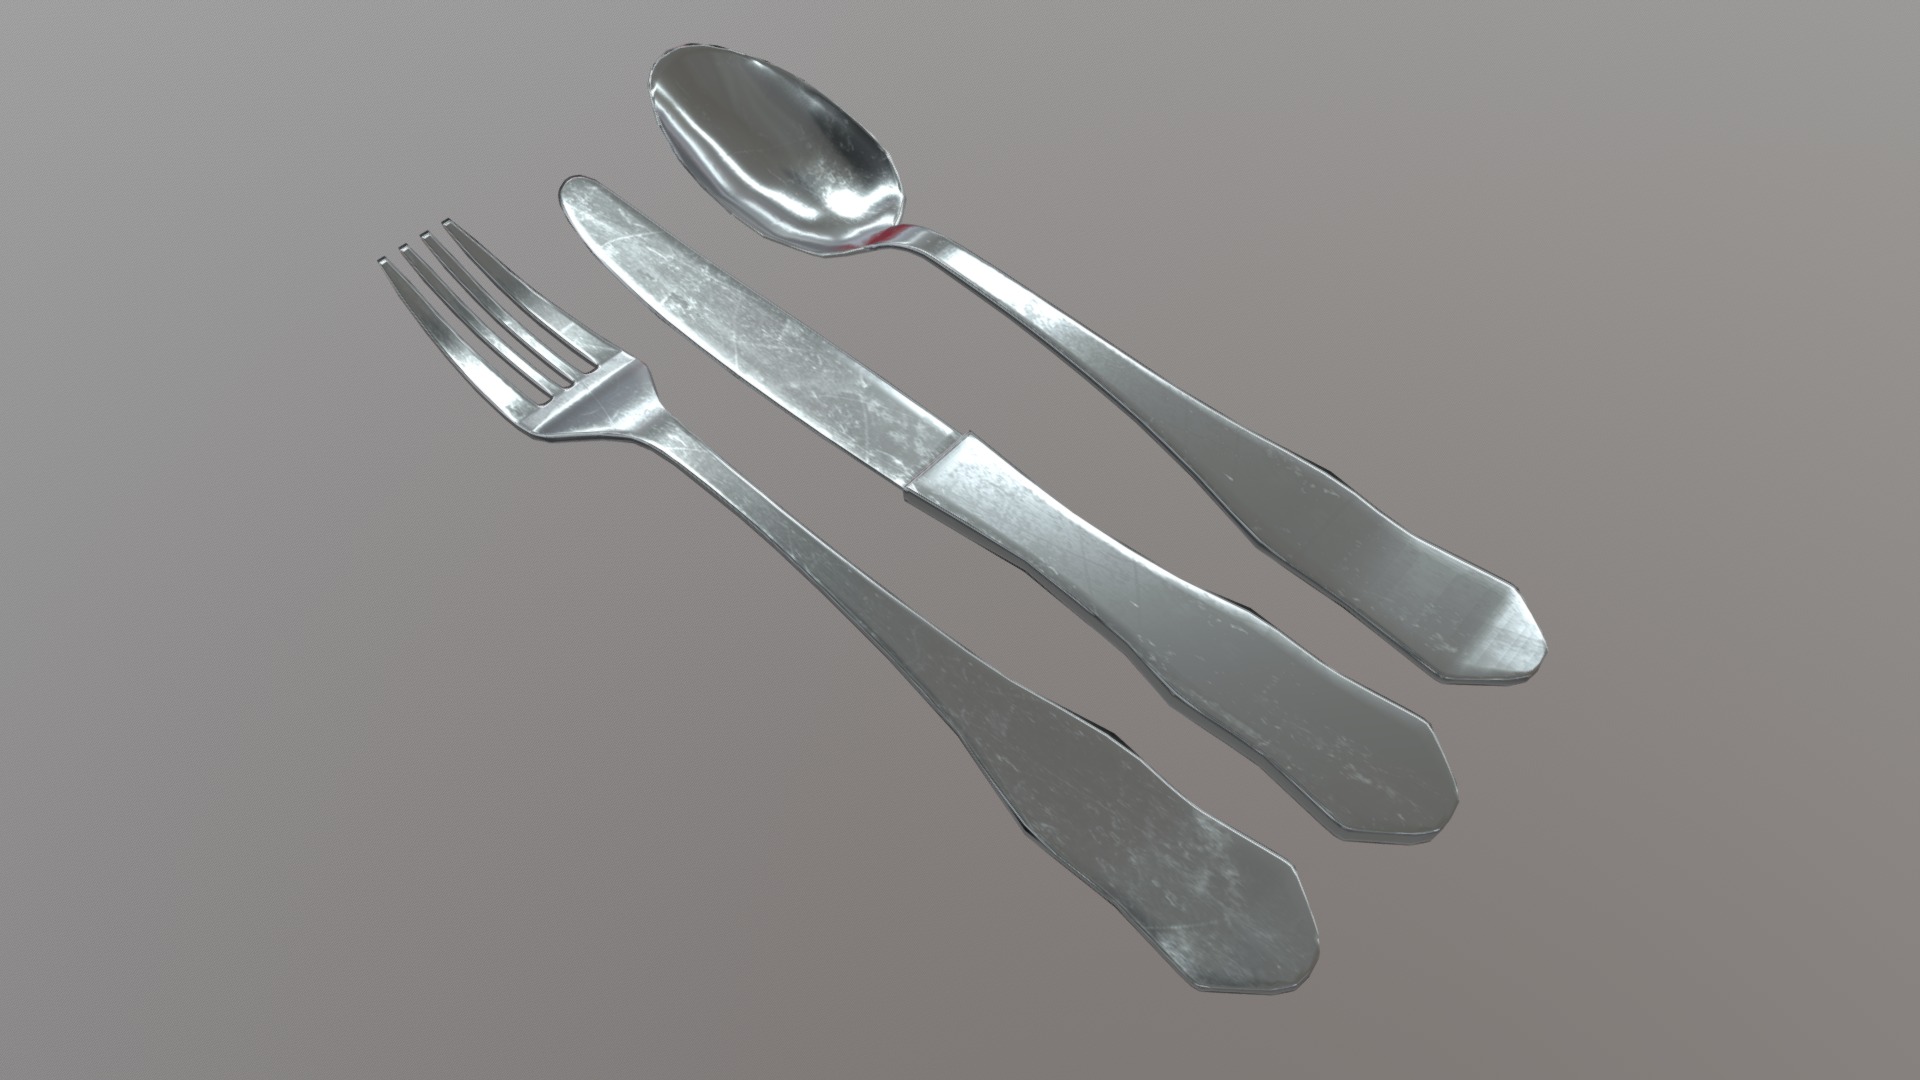 3D model Cutlery - This is a 3D model of the Cutlery. The 3D model is about a silver fork with a silver handle.